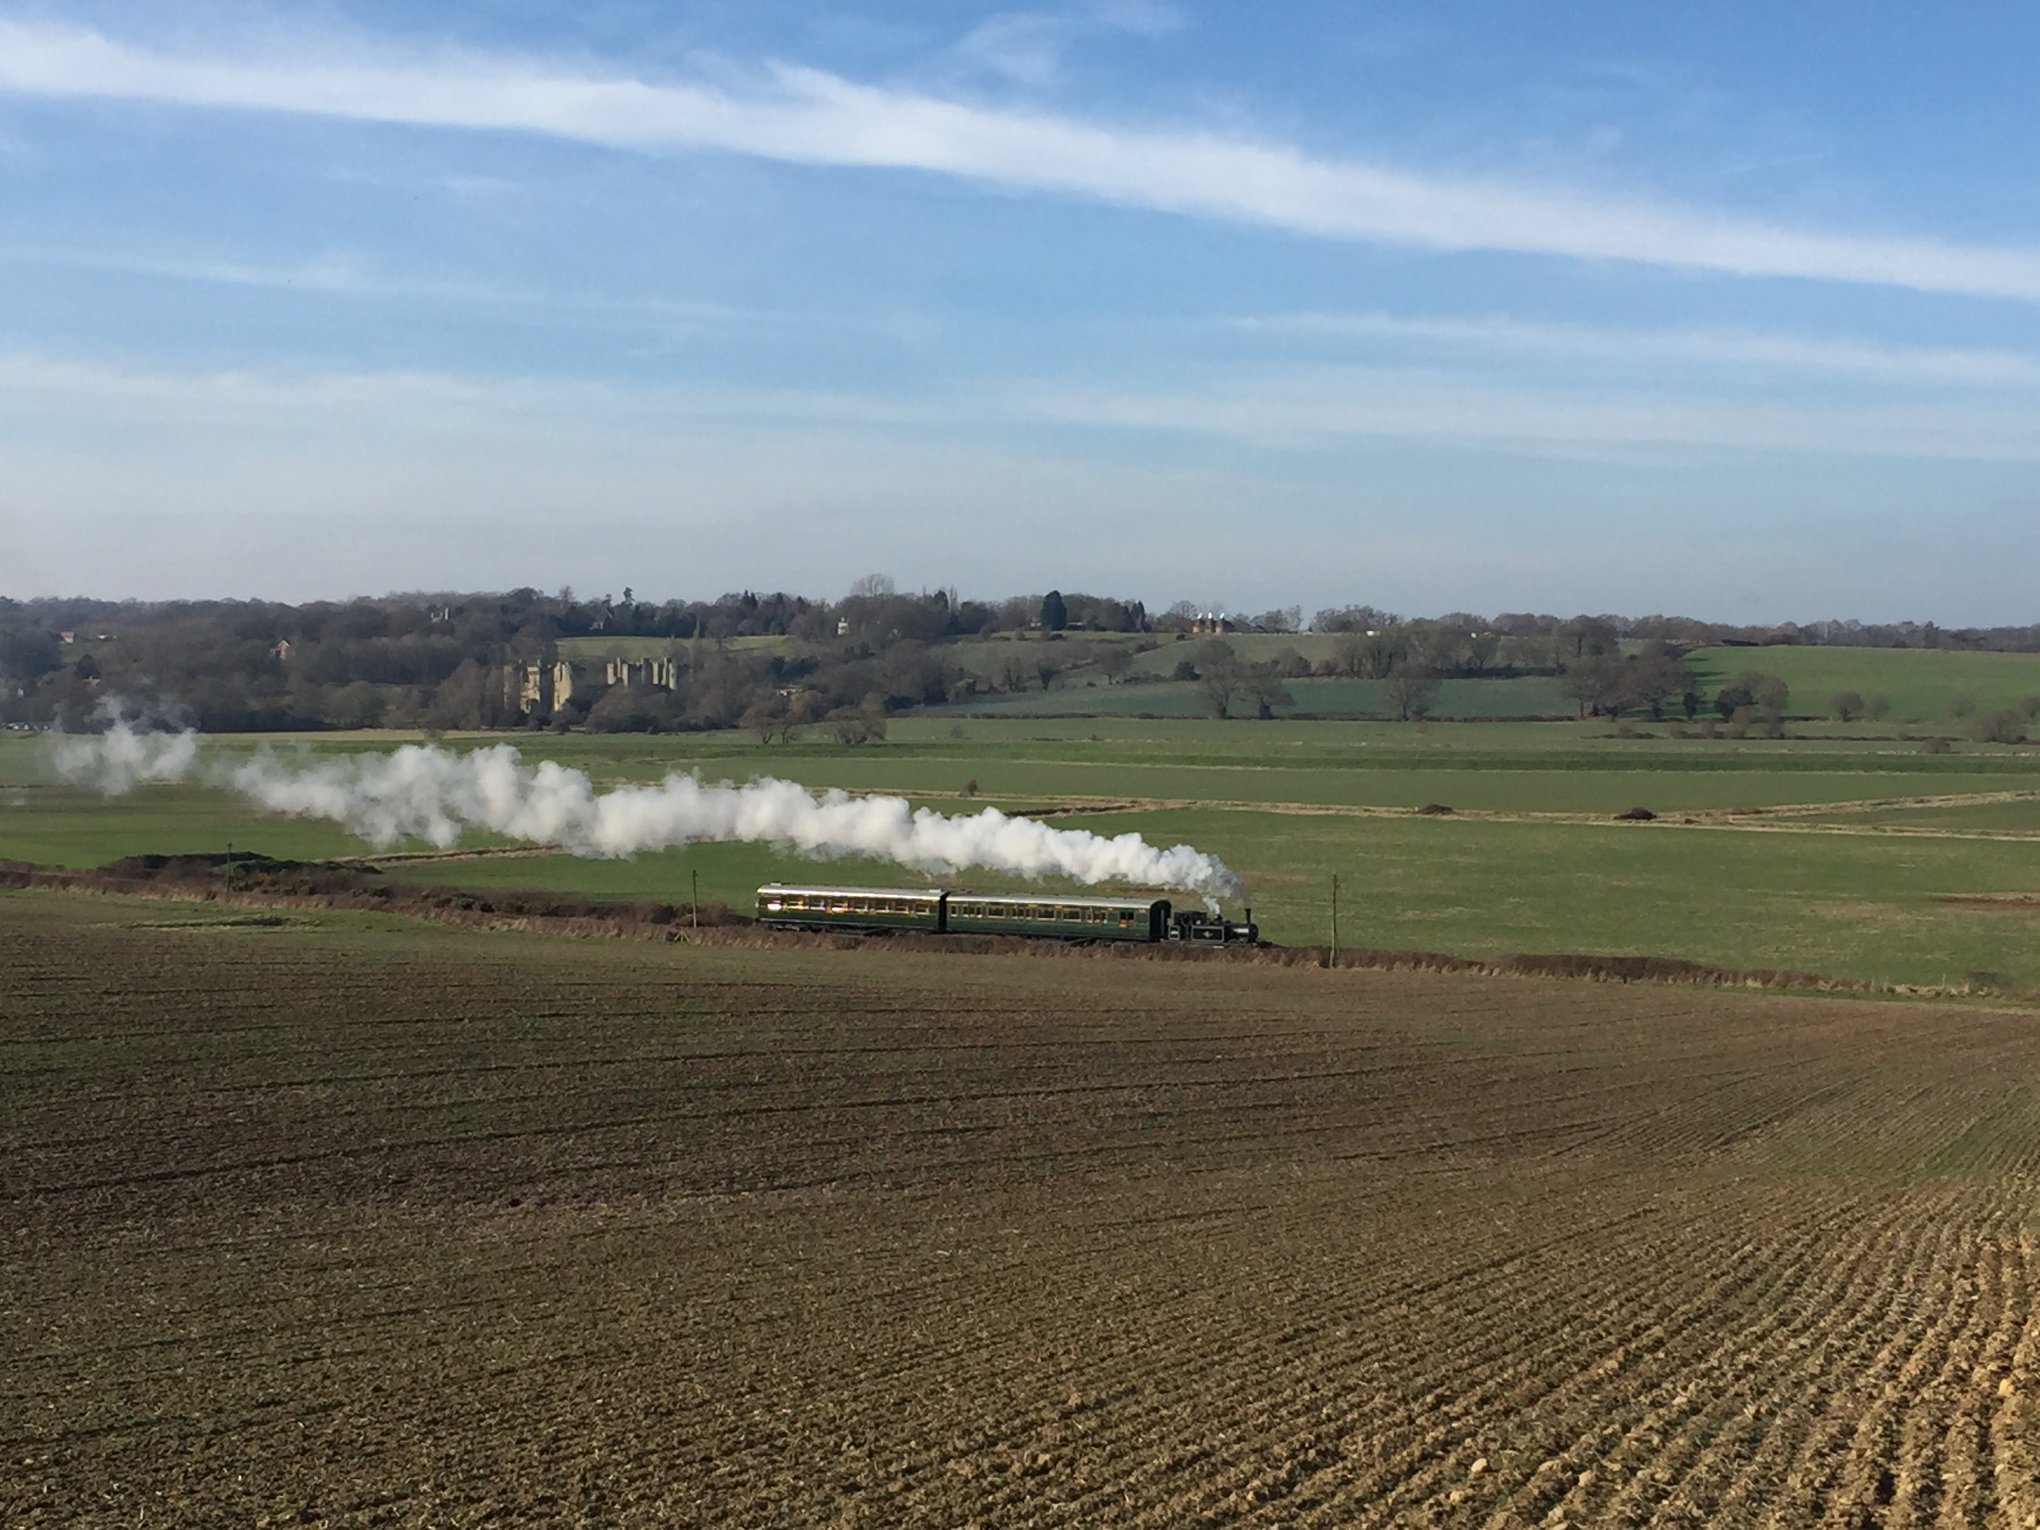 32678 steams past Bodiam Castle with a photocharter on  22 Feb 19  © Andrew Hardy